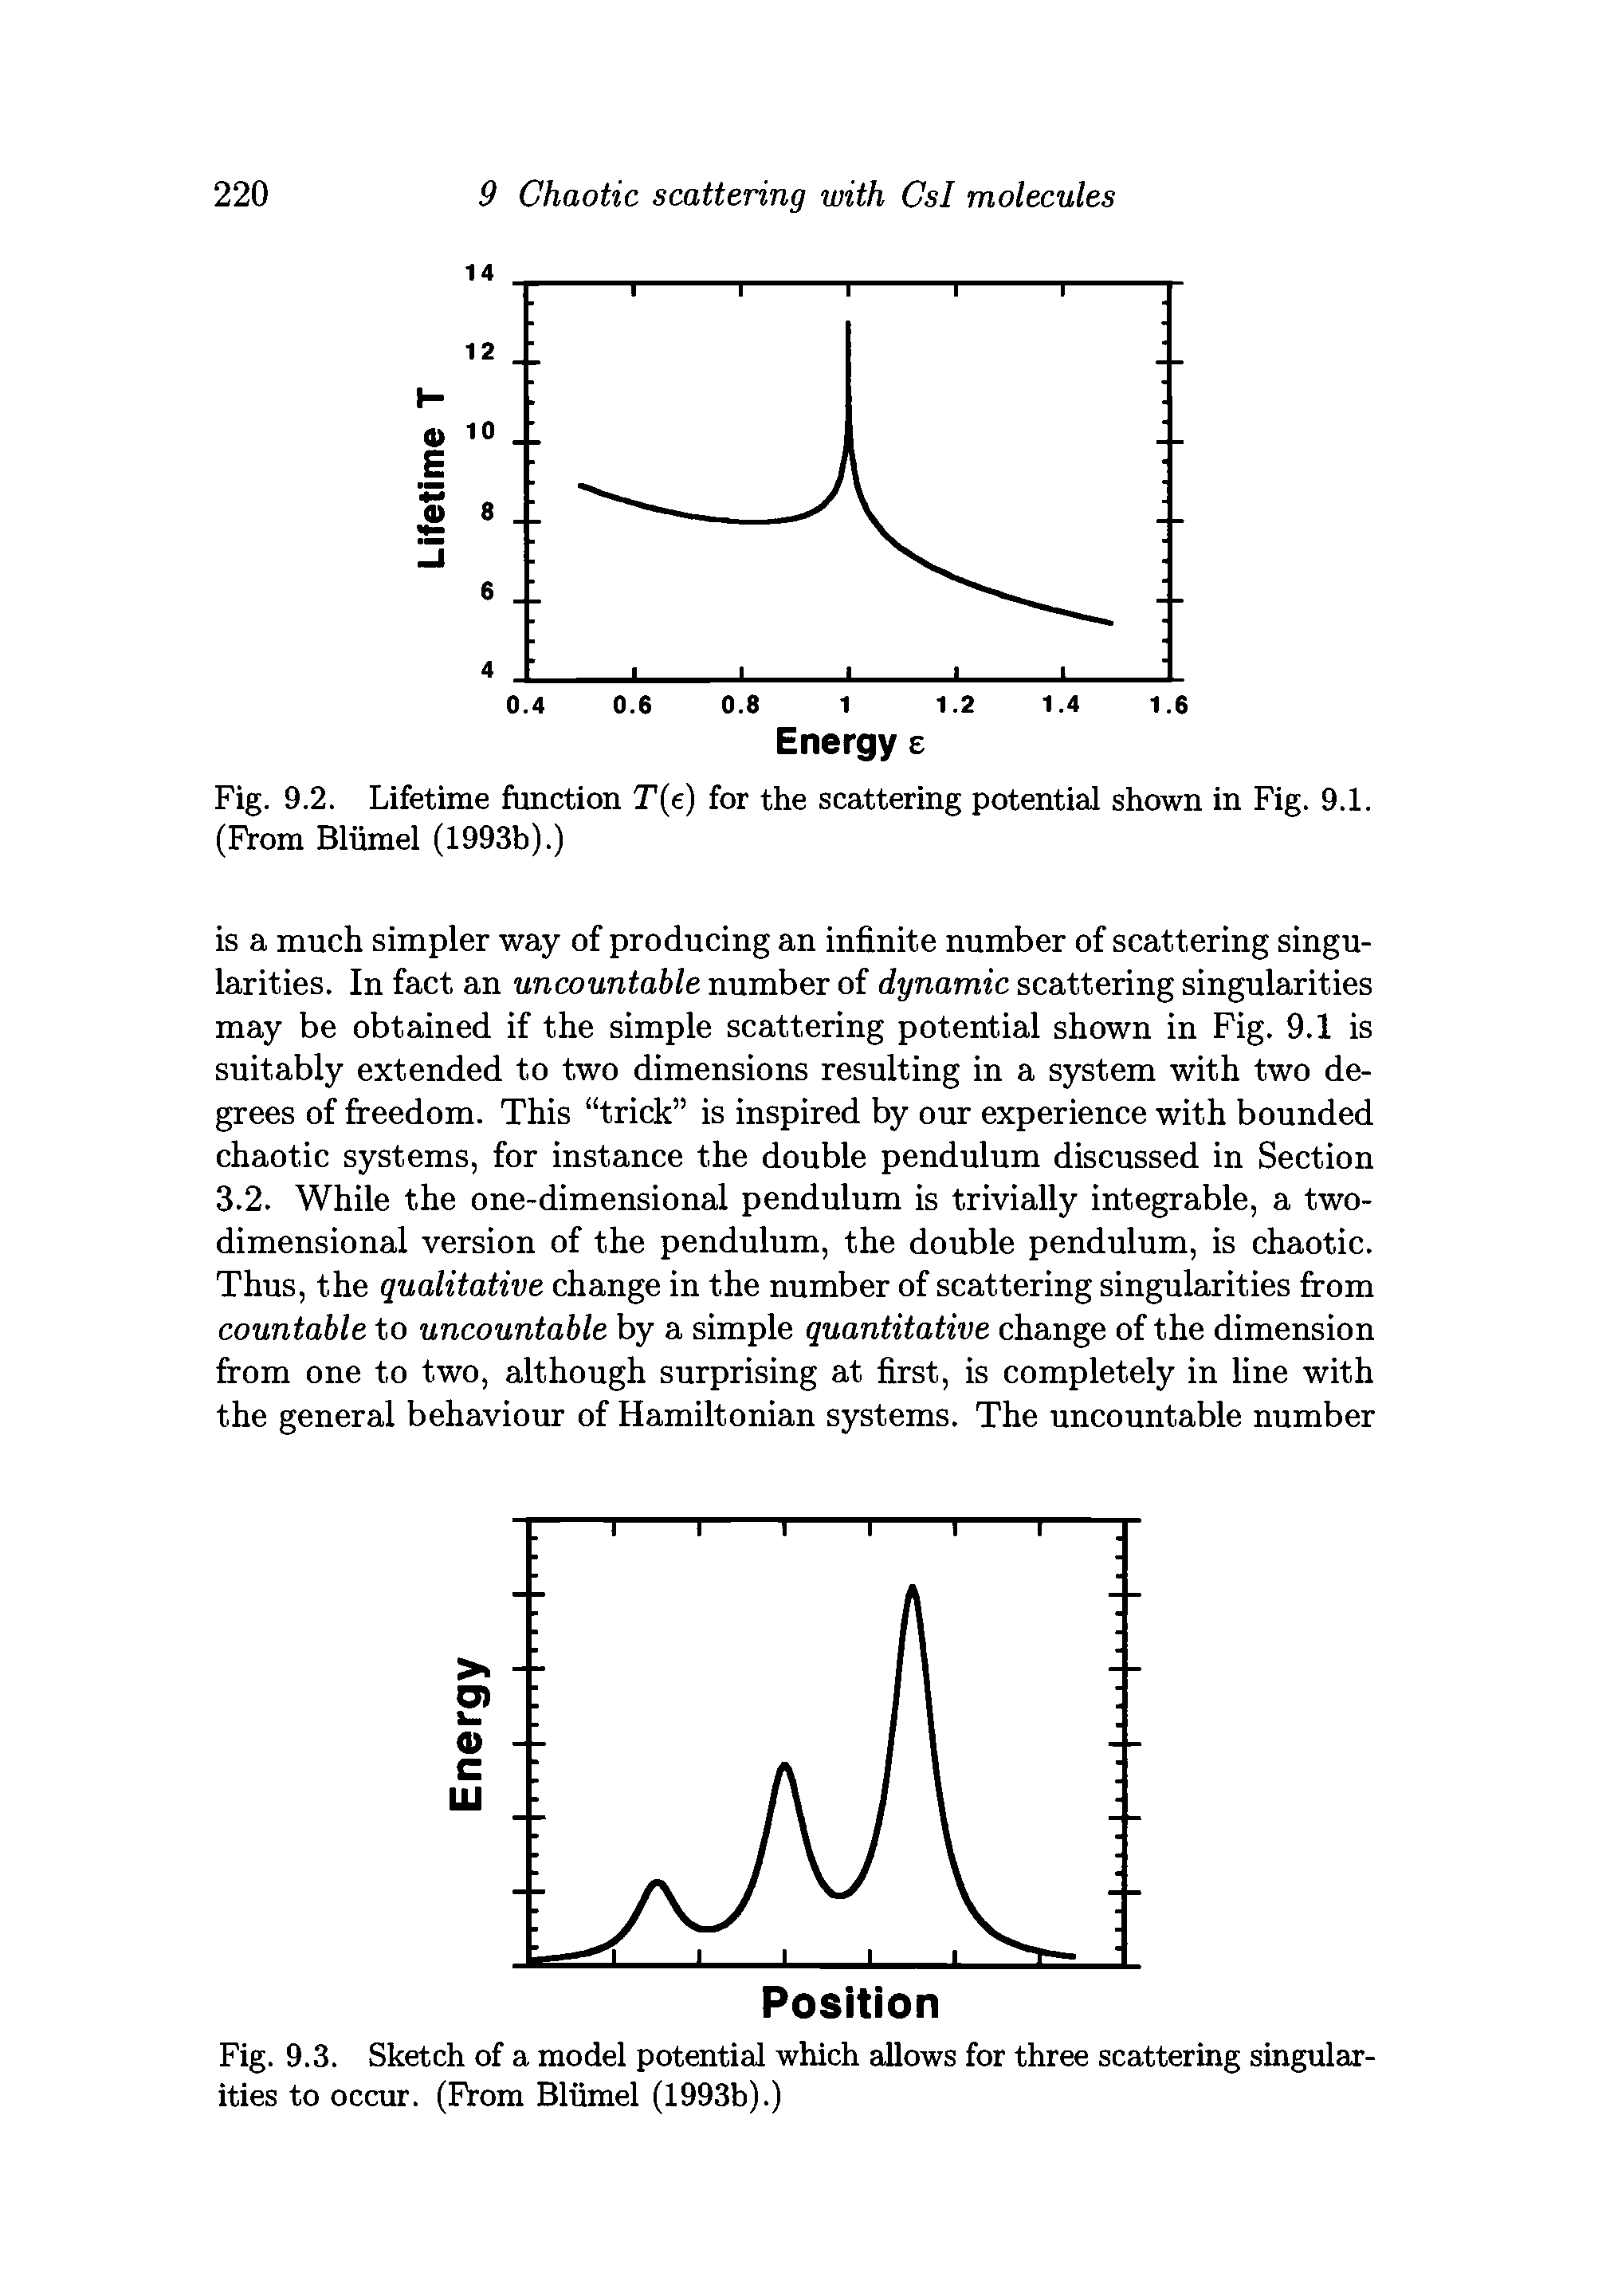 Fig. 9.2. Lifetime function T e) for the scattering potential shown in Fig. 9.1. (From Bliimel (1993b).)...